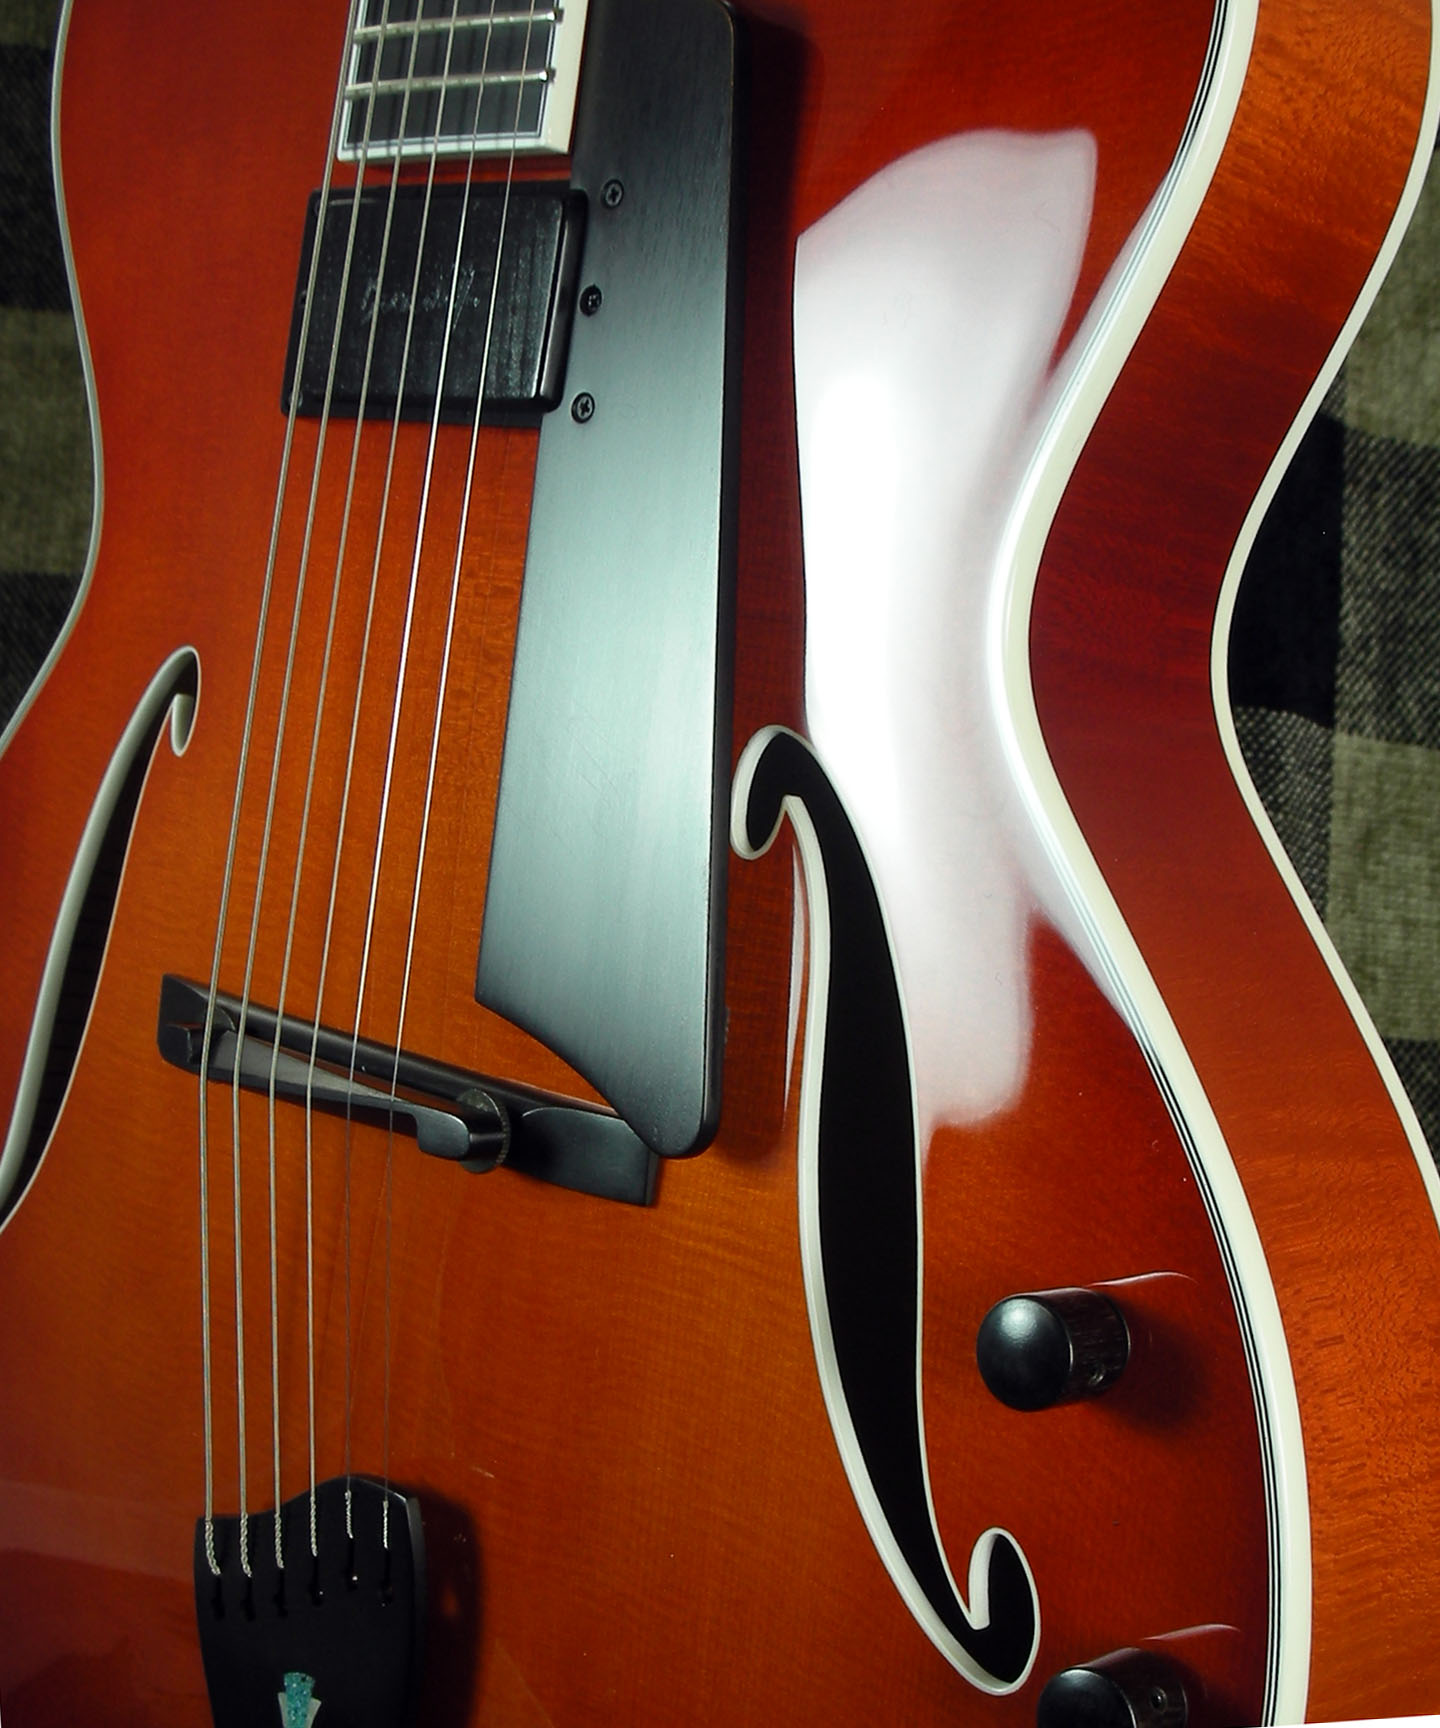  - Benedetto Bravo Deluxe Serial No S2082 archtop jazz guitar photo by Cindy Benedetto